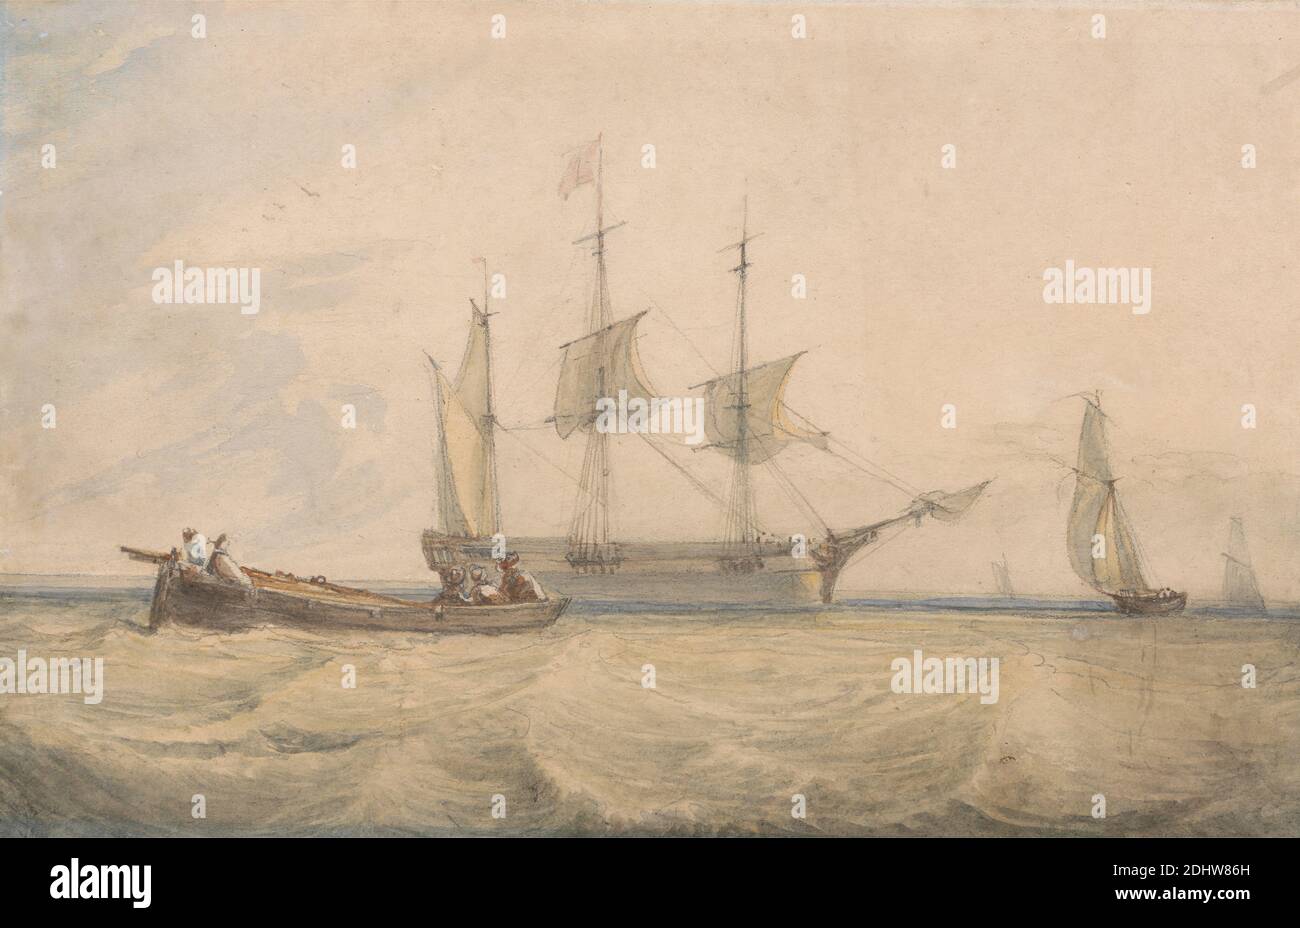 Shipping Off the Coast, follower of François Louis Thomas Francia, 1772–1839, French, active in Britain, formerly attributed to François Louis Thomas Francia, 1772–1839, French, active in Britain, undated, Watercolor over graphite on moderately thick, smooth, cream wove paper, pasted on mount, Sheet: 5 7/8 x 9 1/8 inches (14.9 x 23.2 cm), boats, flag, marine art, sailboats, sea, seamen, ships Stock Photo